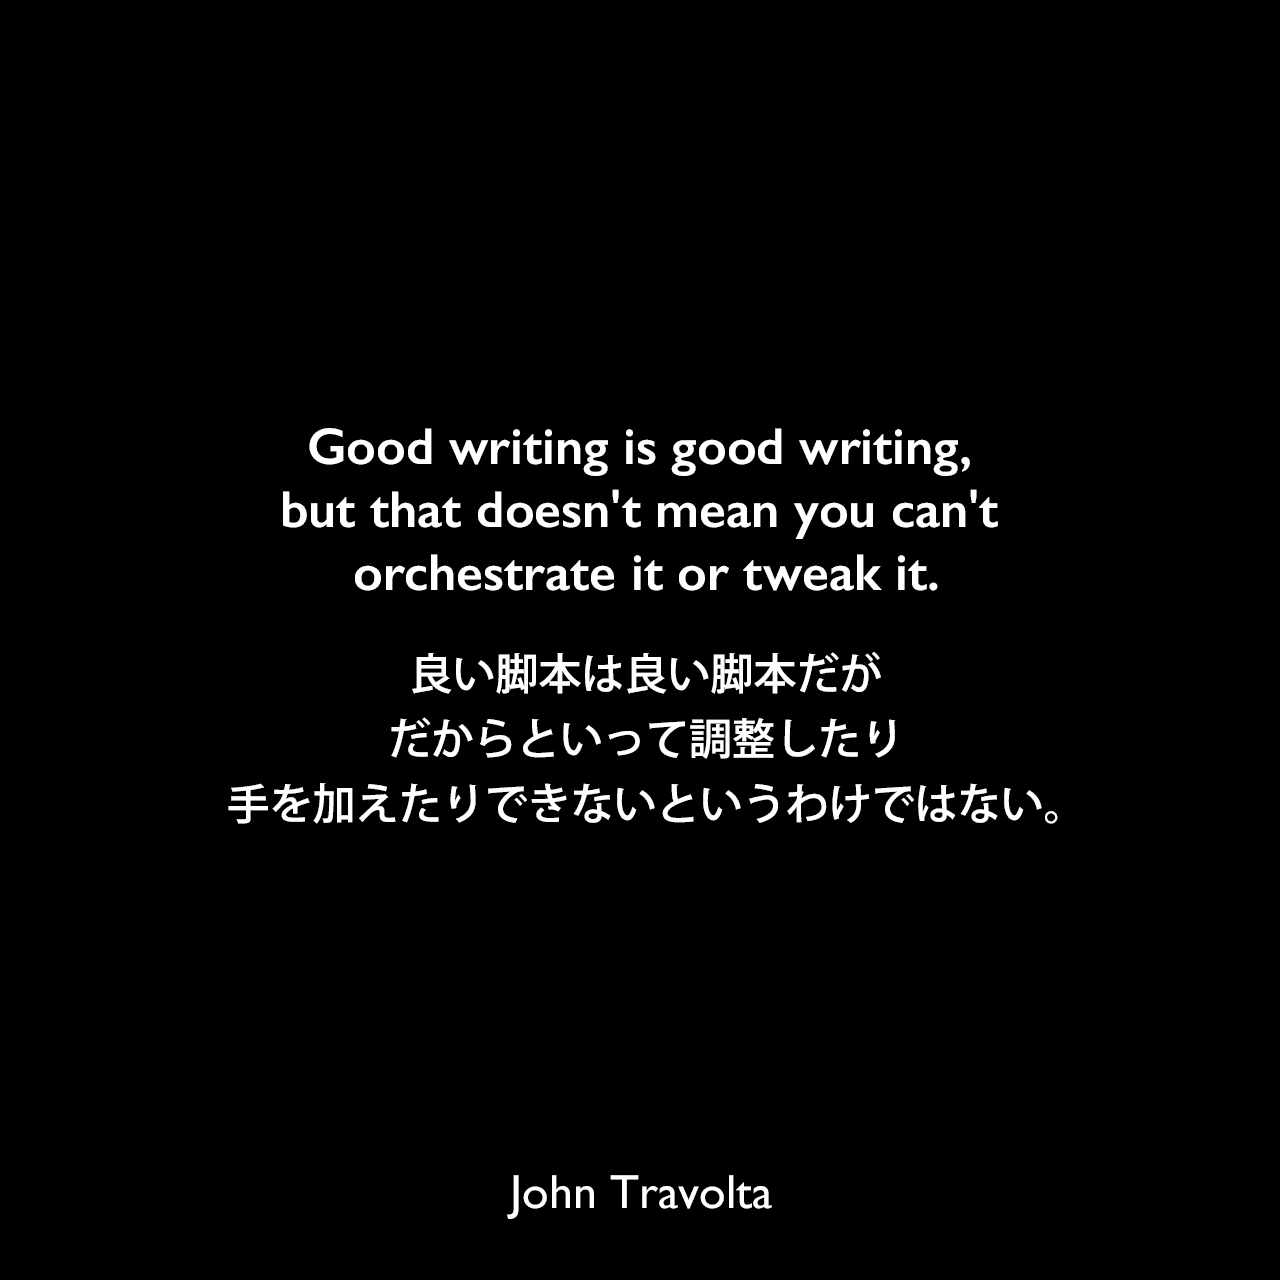 Good writing is good writing, but that doesn't mean you can't orchestrate it or tweak it.良い脚本は良い脚本だが、だからといって調整したり、手を加えたりできないというわけではない。John Travolta